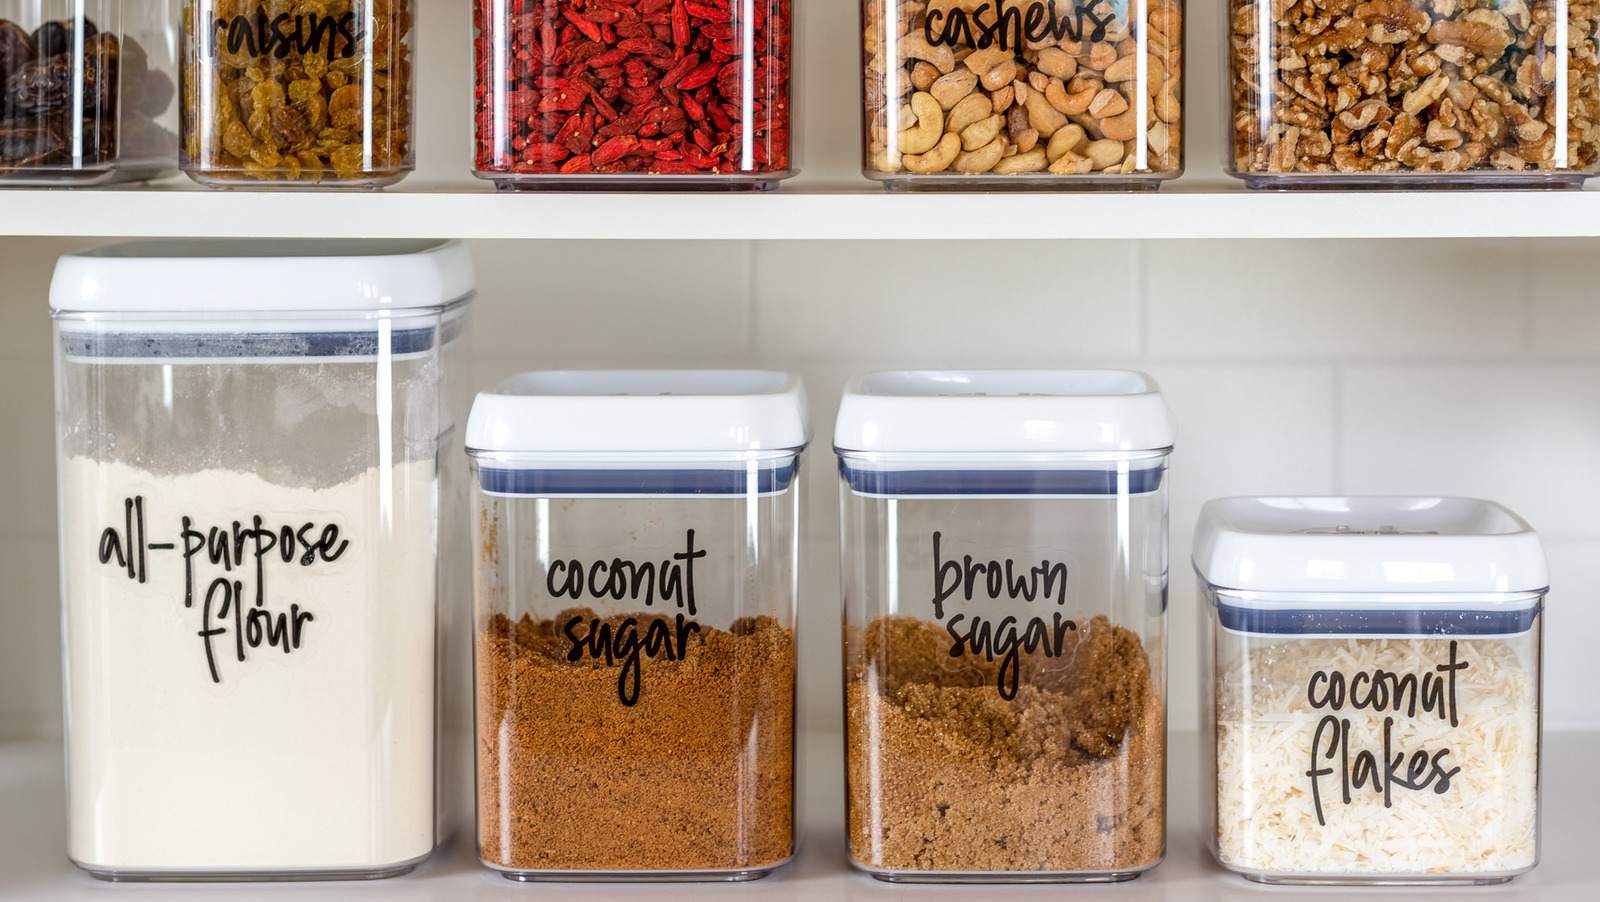 https://www.housedigest.com/img/gallery/what-is-decanting-and-why-you-should-use-it-to-get-more-organized/l-intro-1658897192.jpg